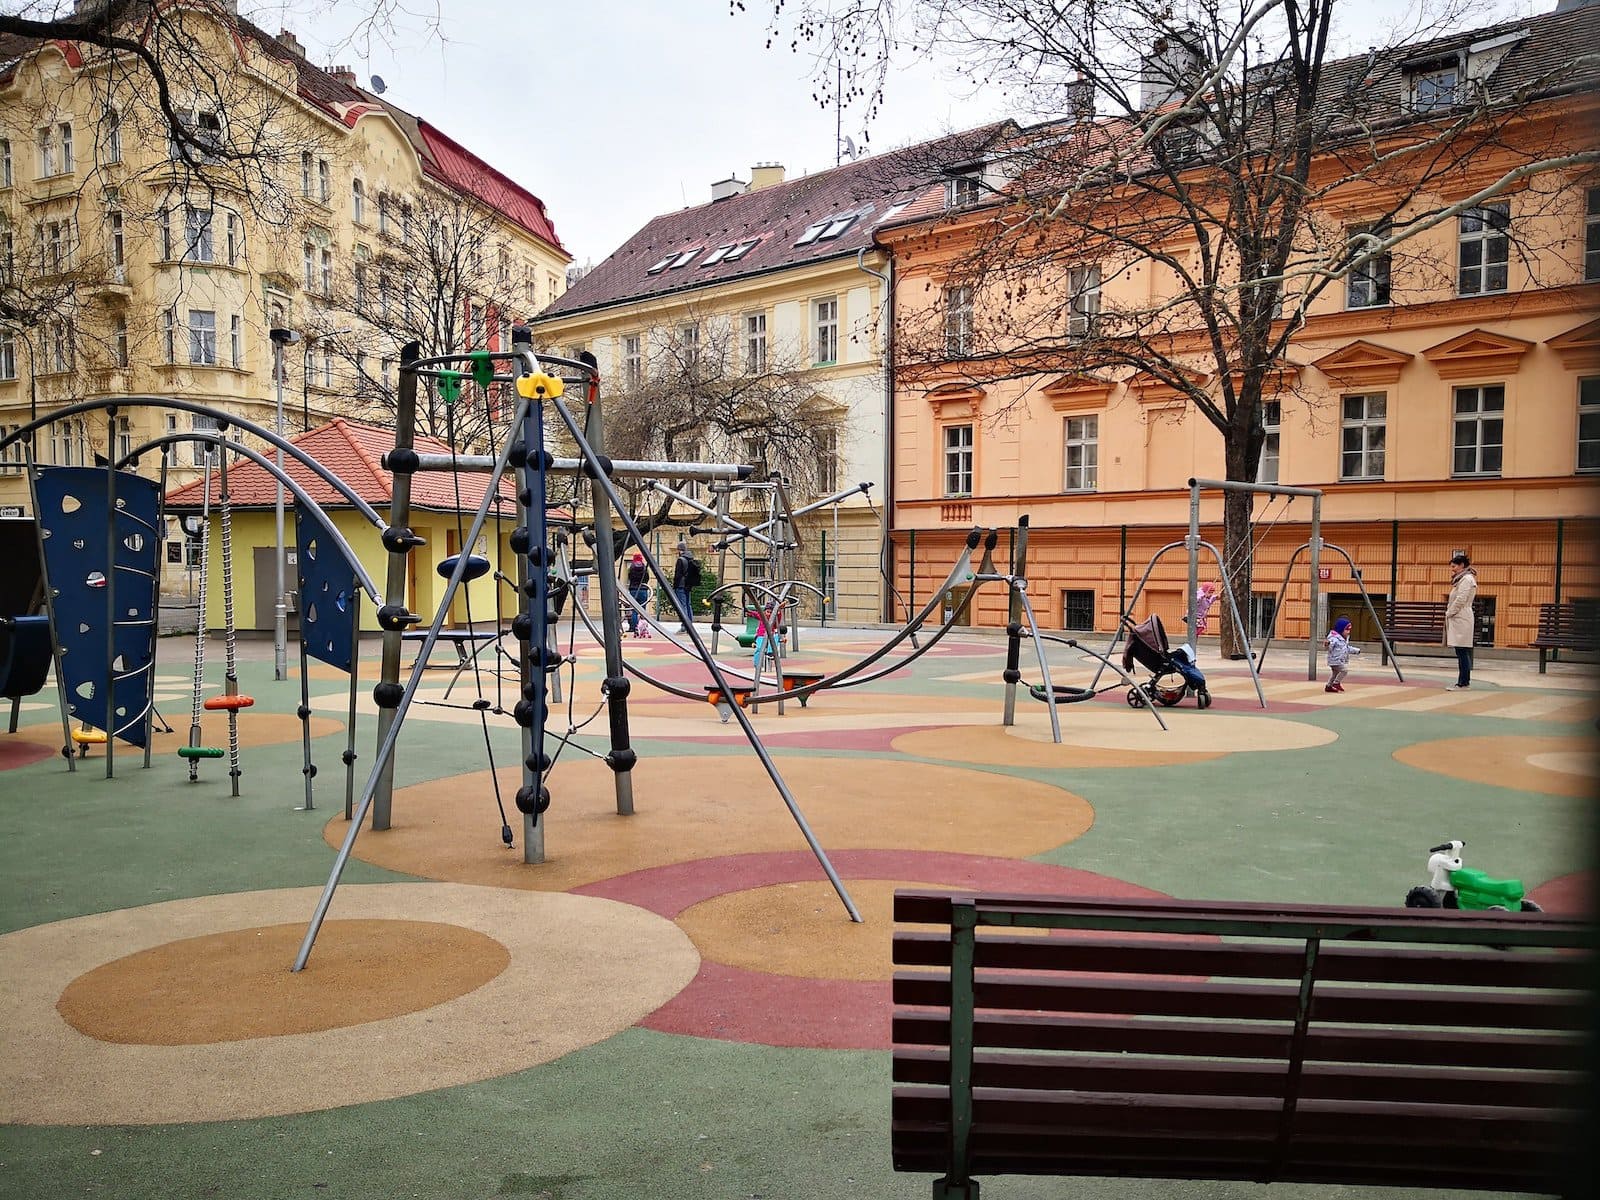 children's playground in a residential area in a city